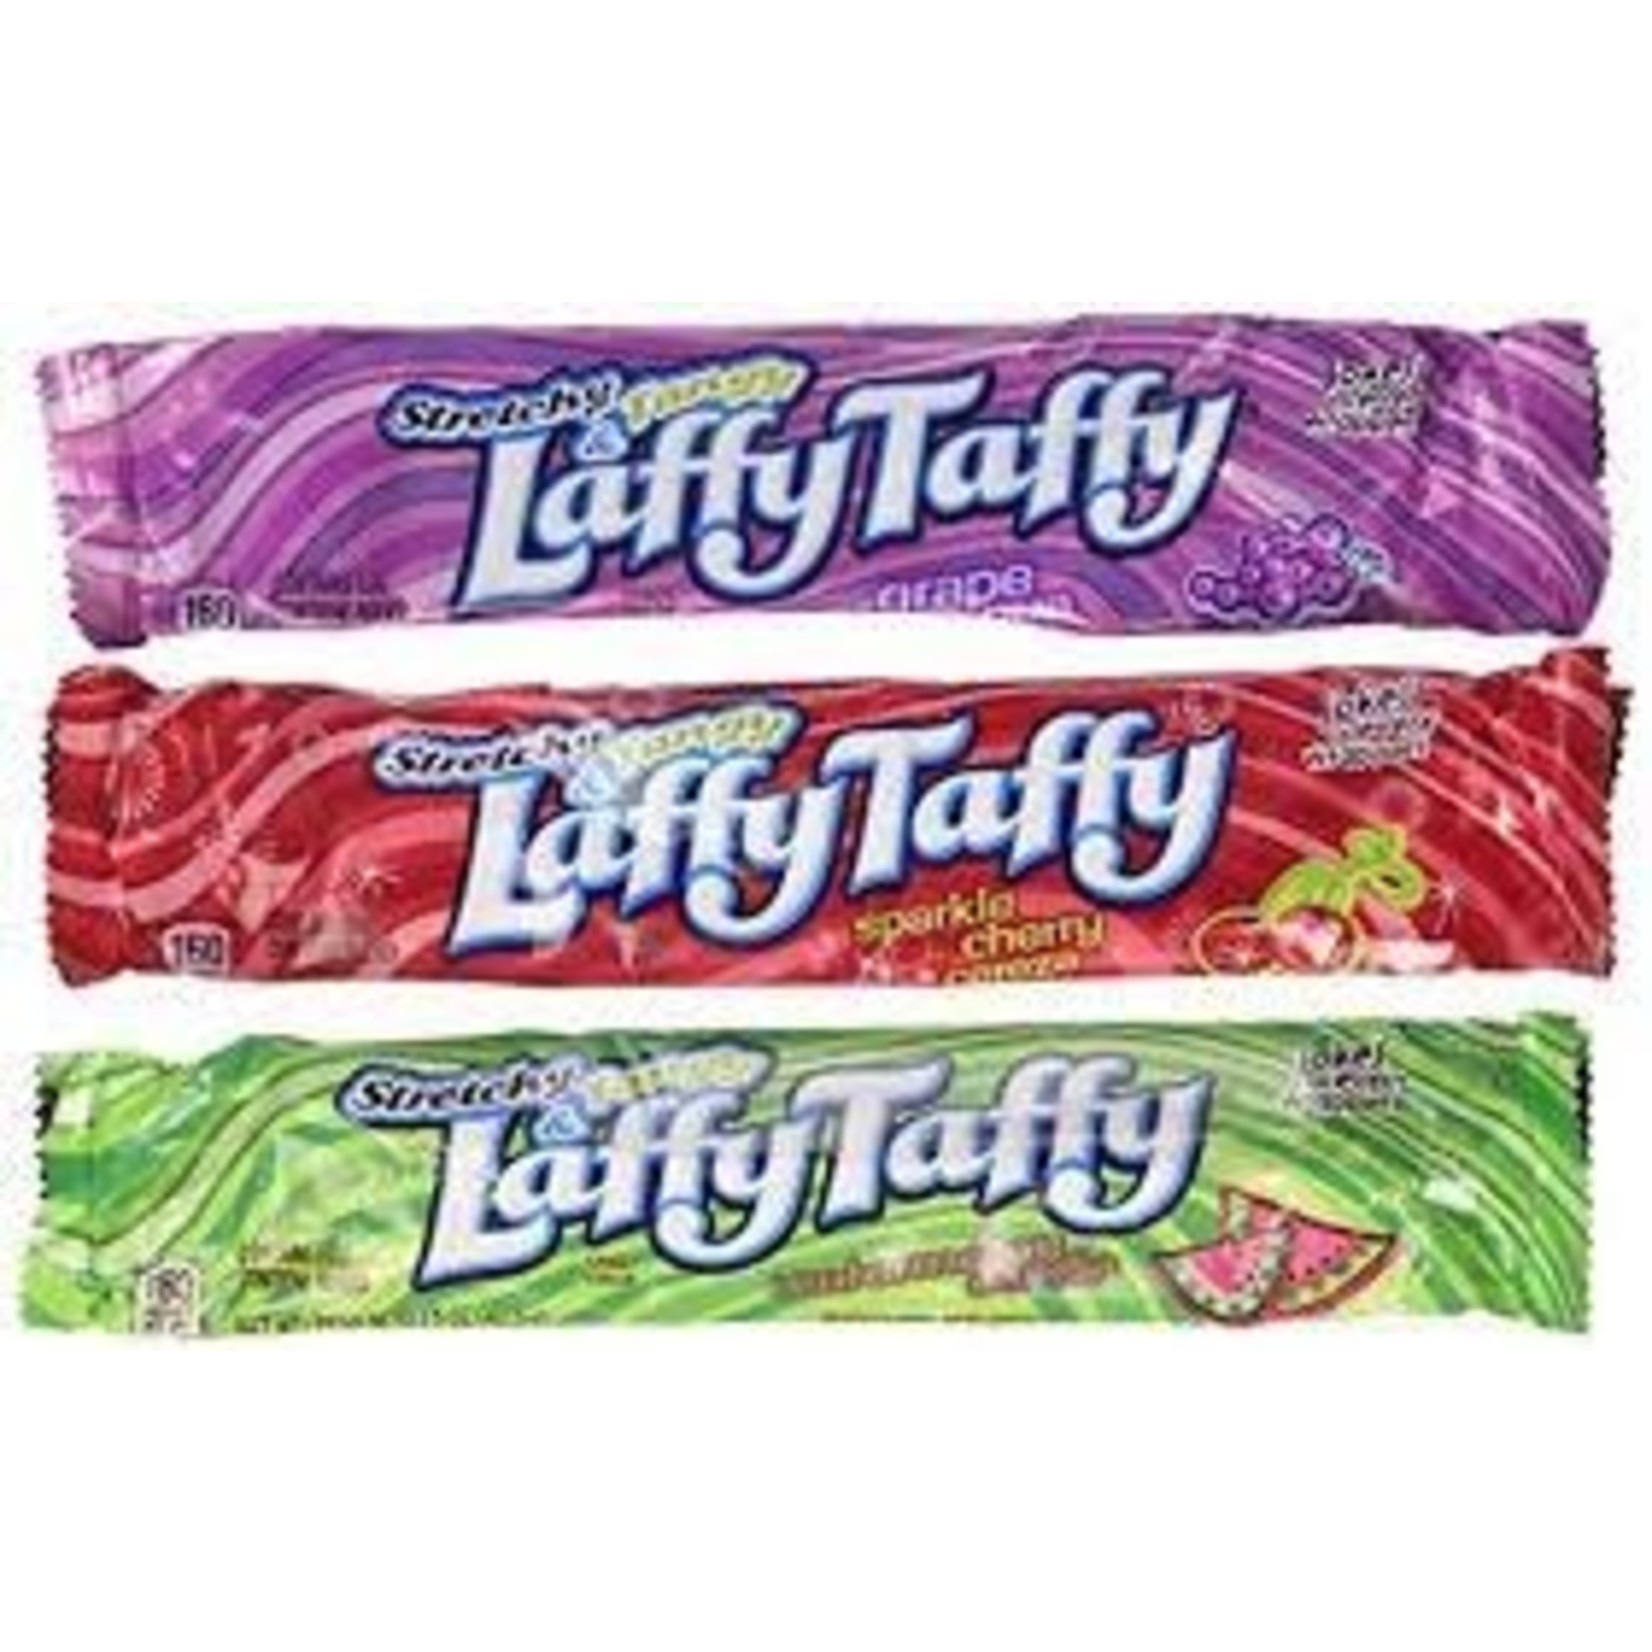 Laffy Taffy Candy Stretchy and Tangy 24ct